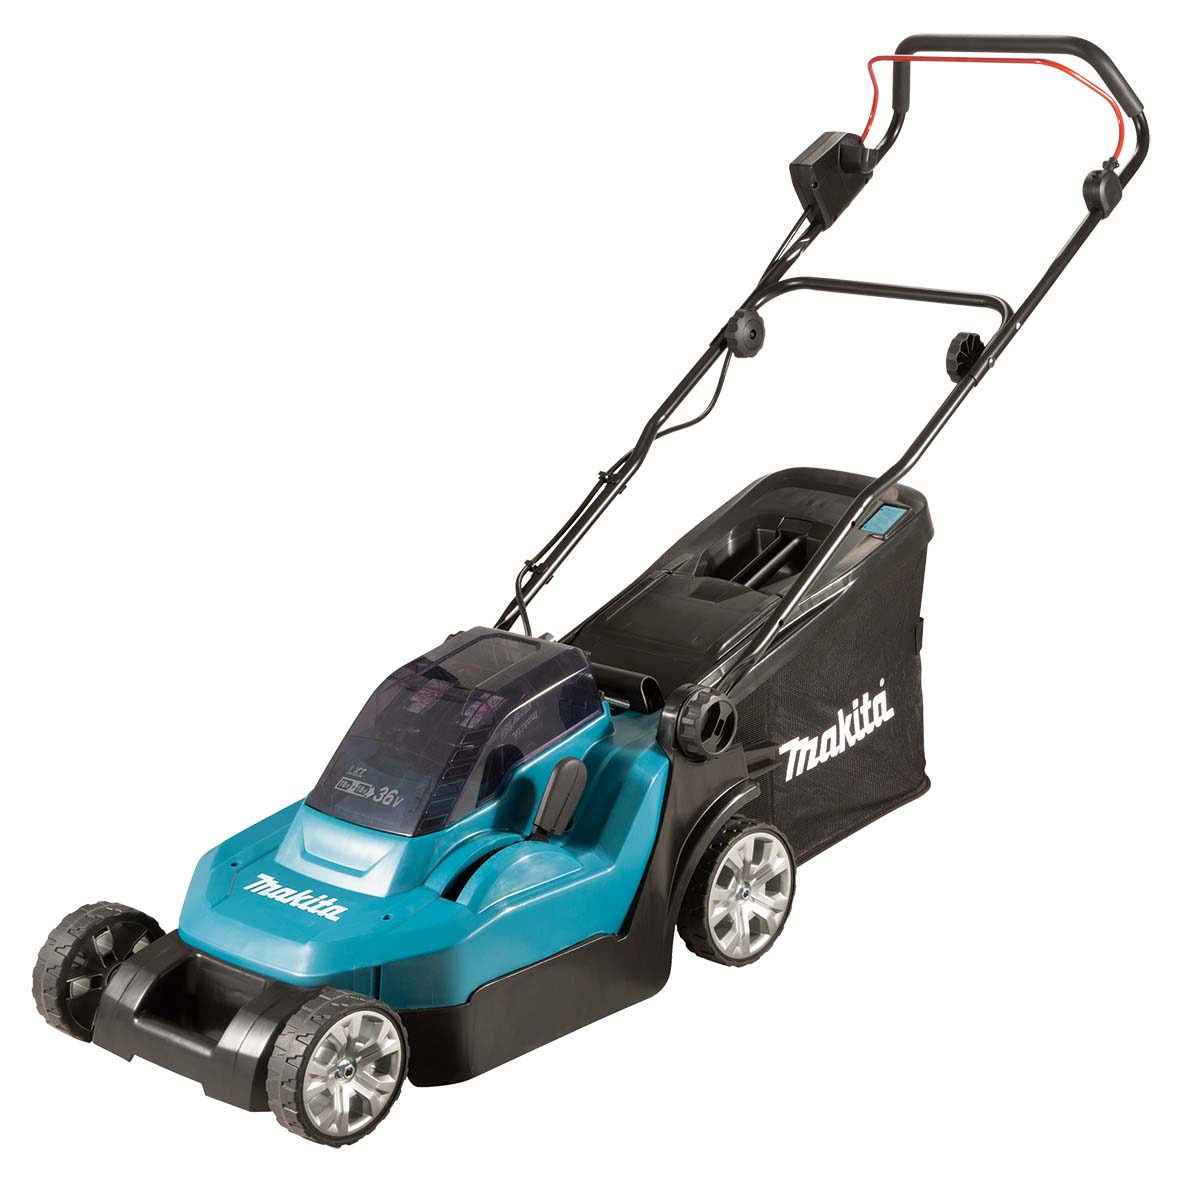 18Vx2 380mm (15") Lawn Mower Bare (Tool Only) DLM382Z by Makita